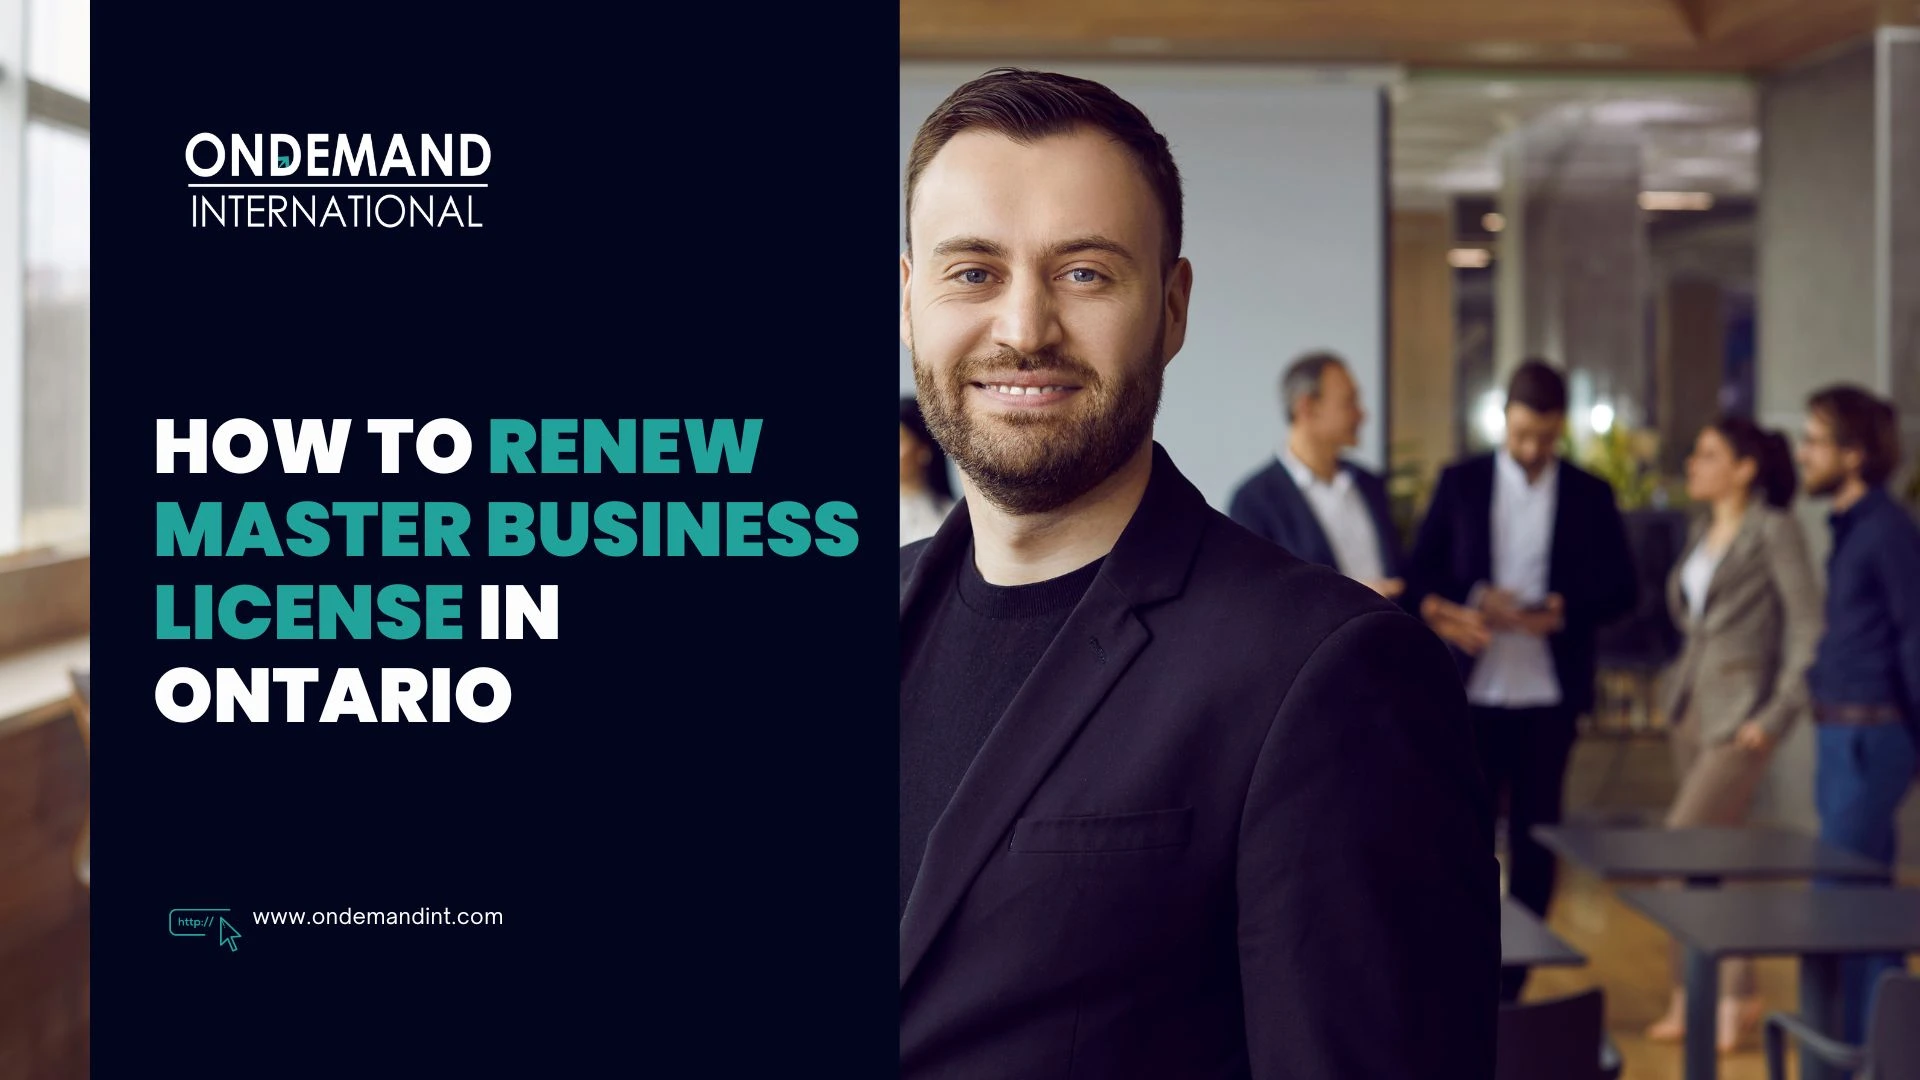 How to Renew Master Business License in Ontario